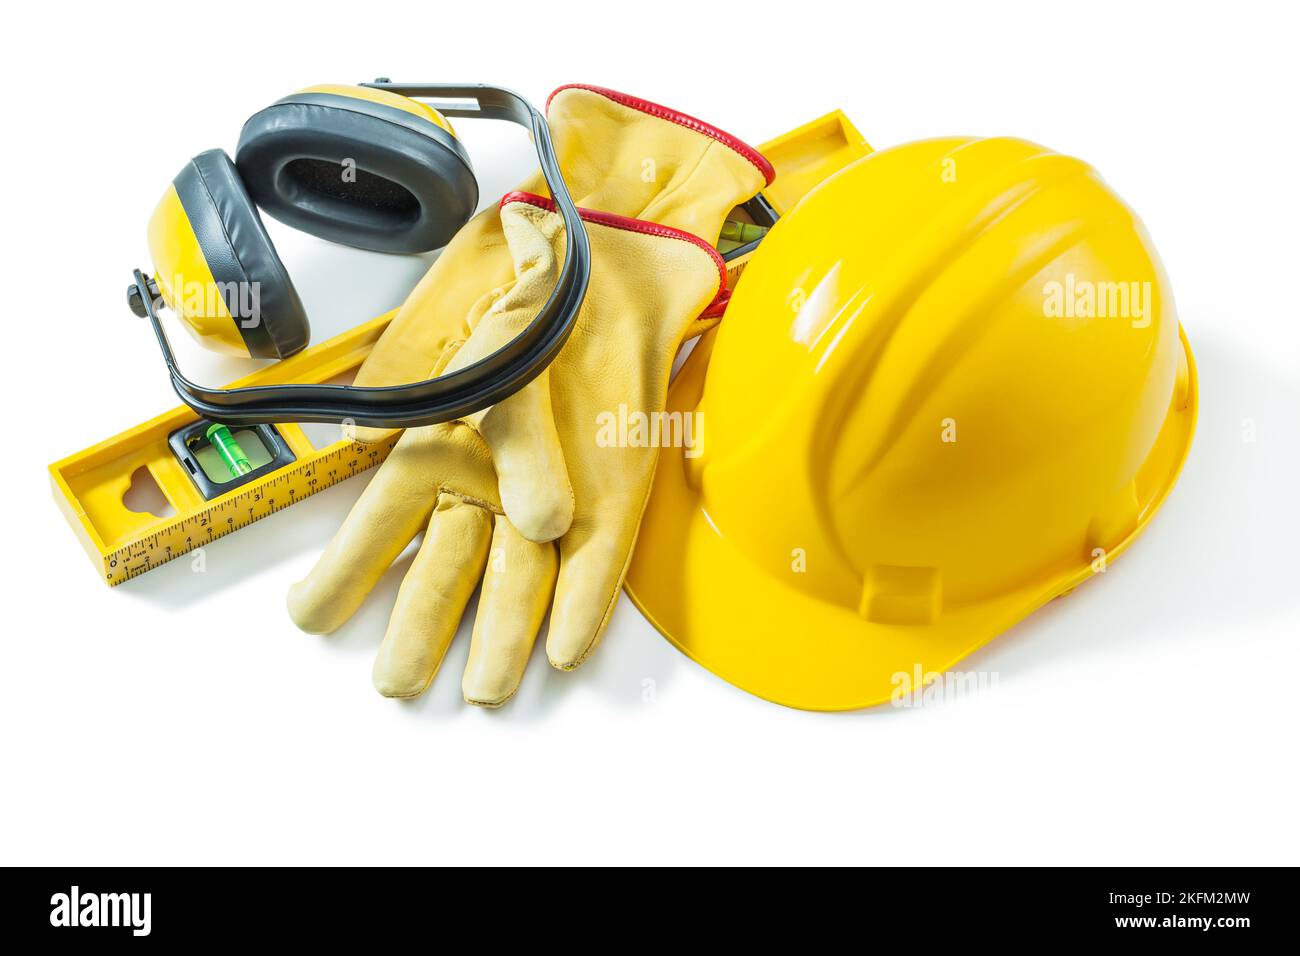 construction working tools helmet gloves level earphones isolated on white background Stock Photo